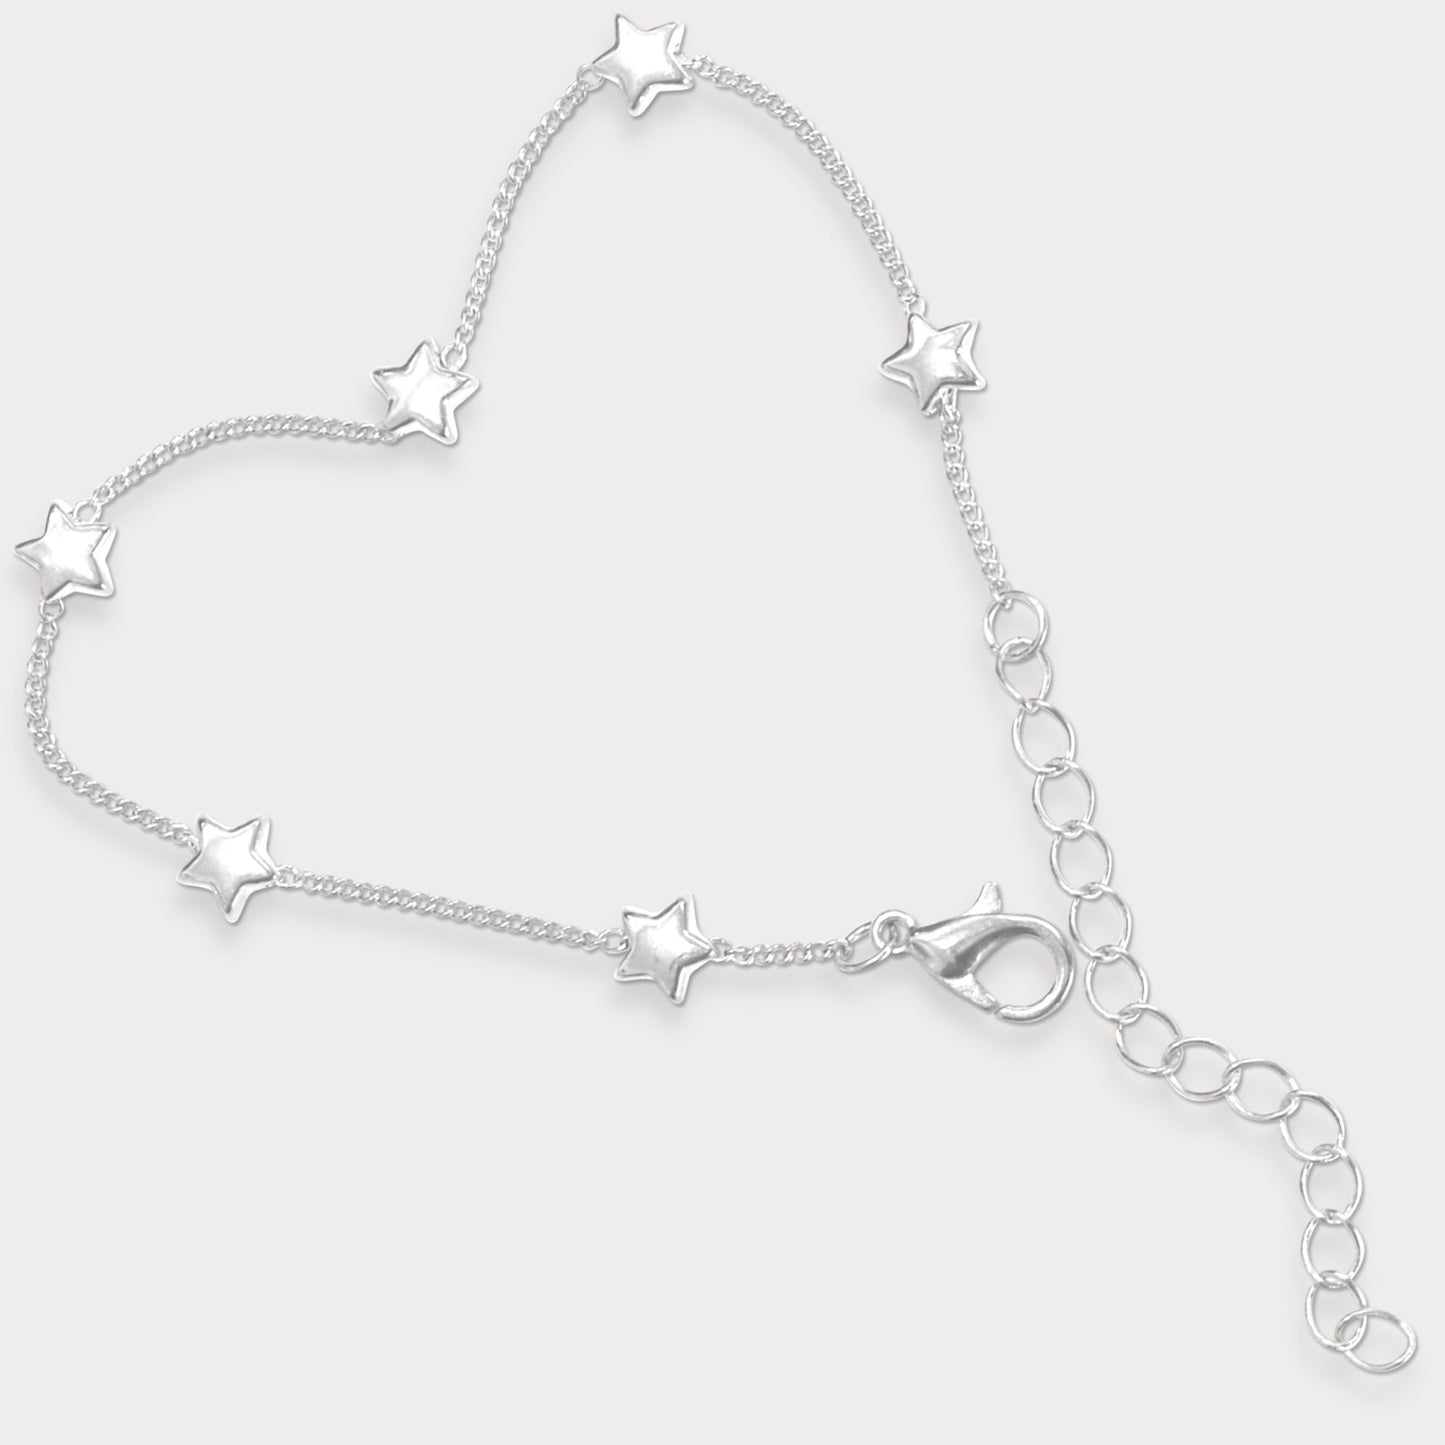 Gifts for Besties - 925 Silver Star Bracelet with Card and Gift Wrap